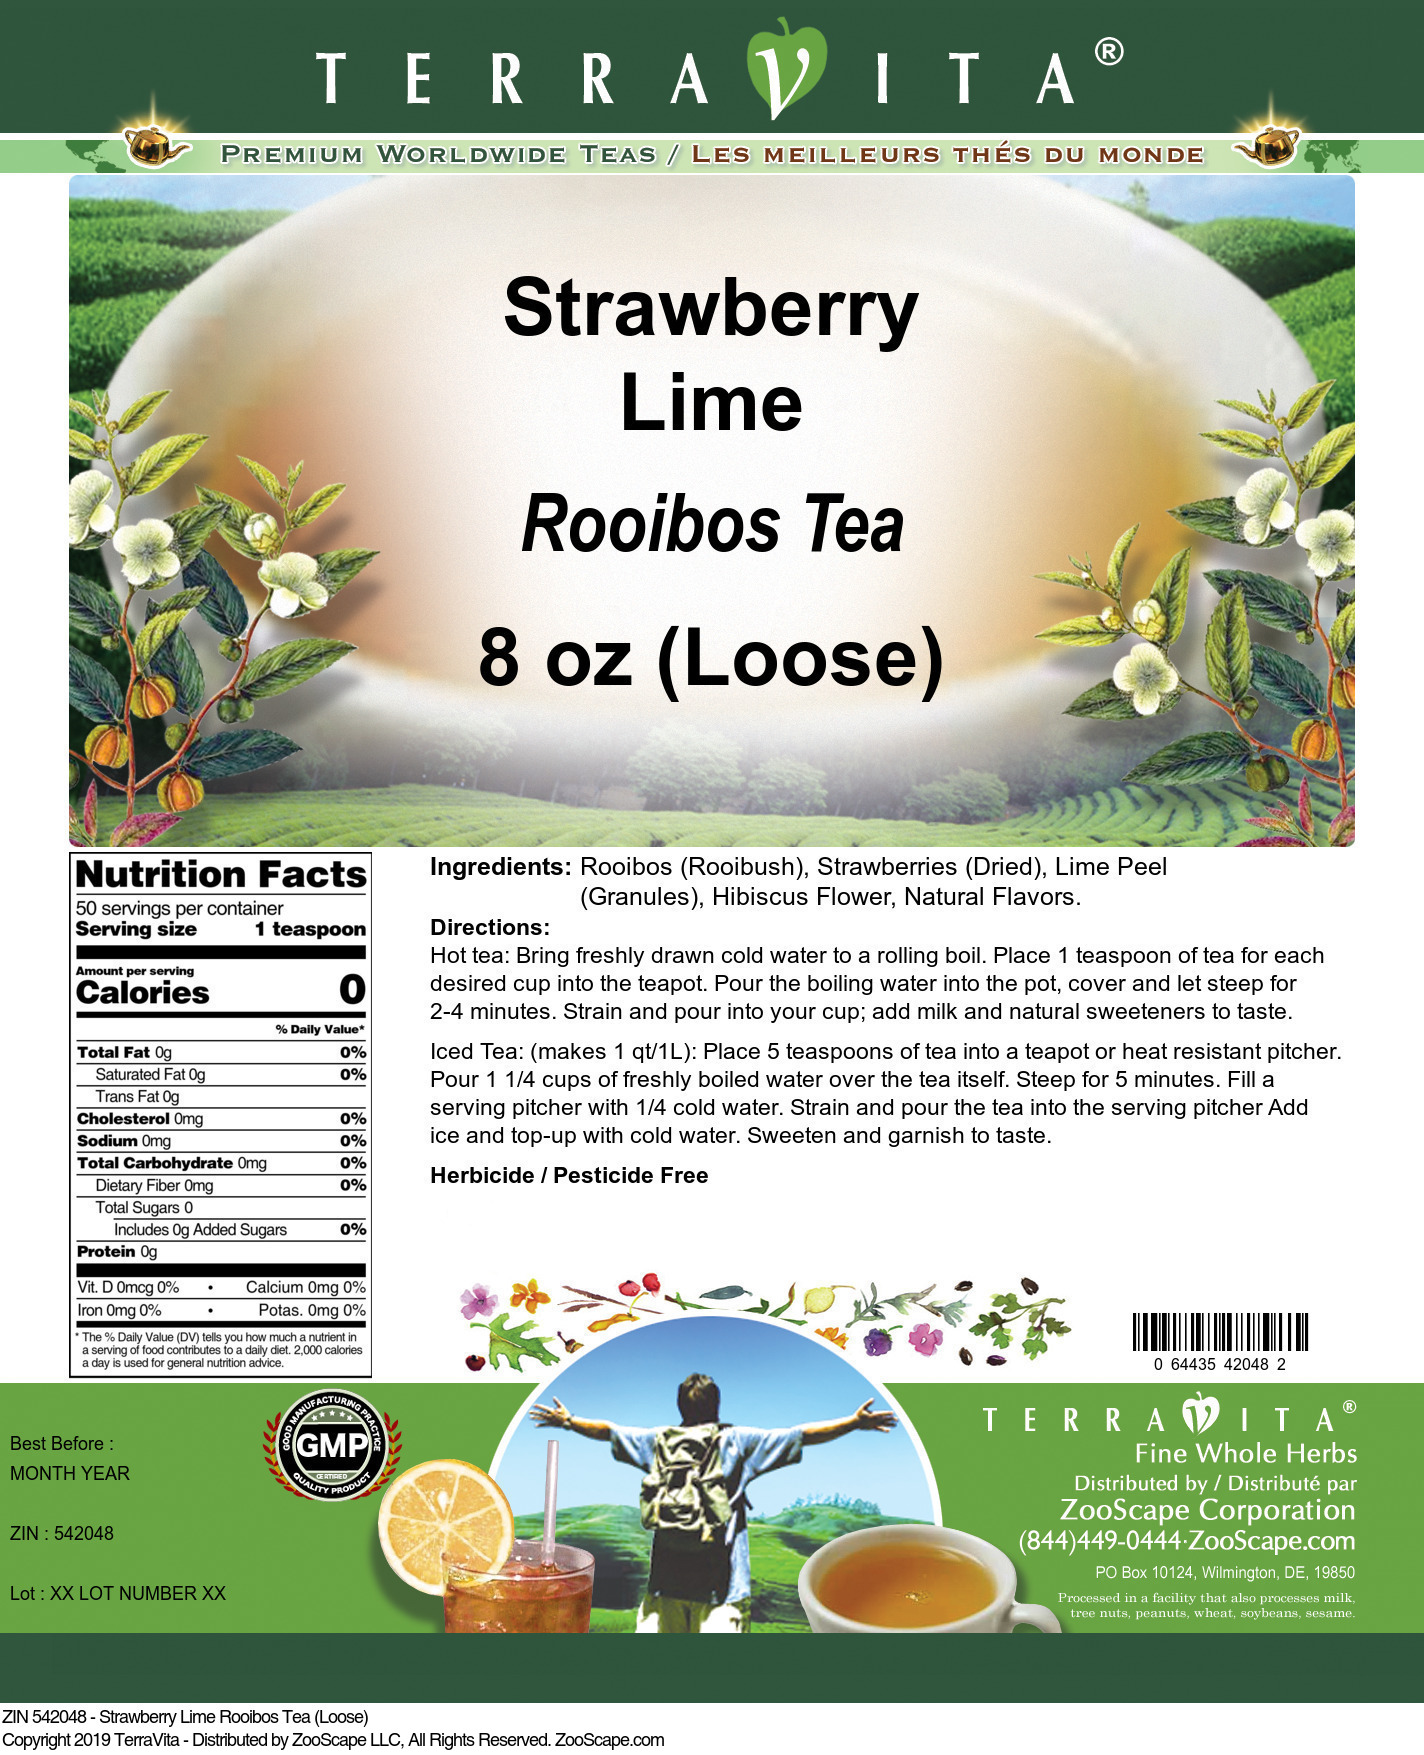 Strawberry Lime Rooibos Tea (Loose) - Label